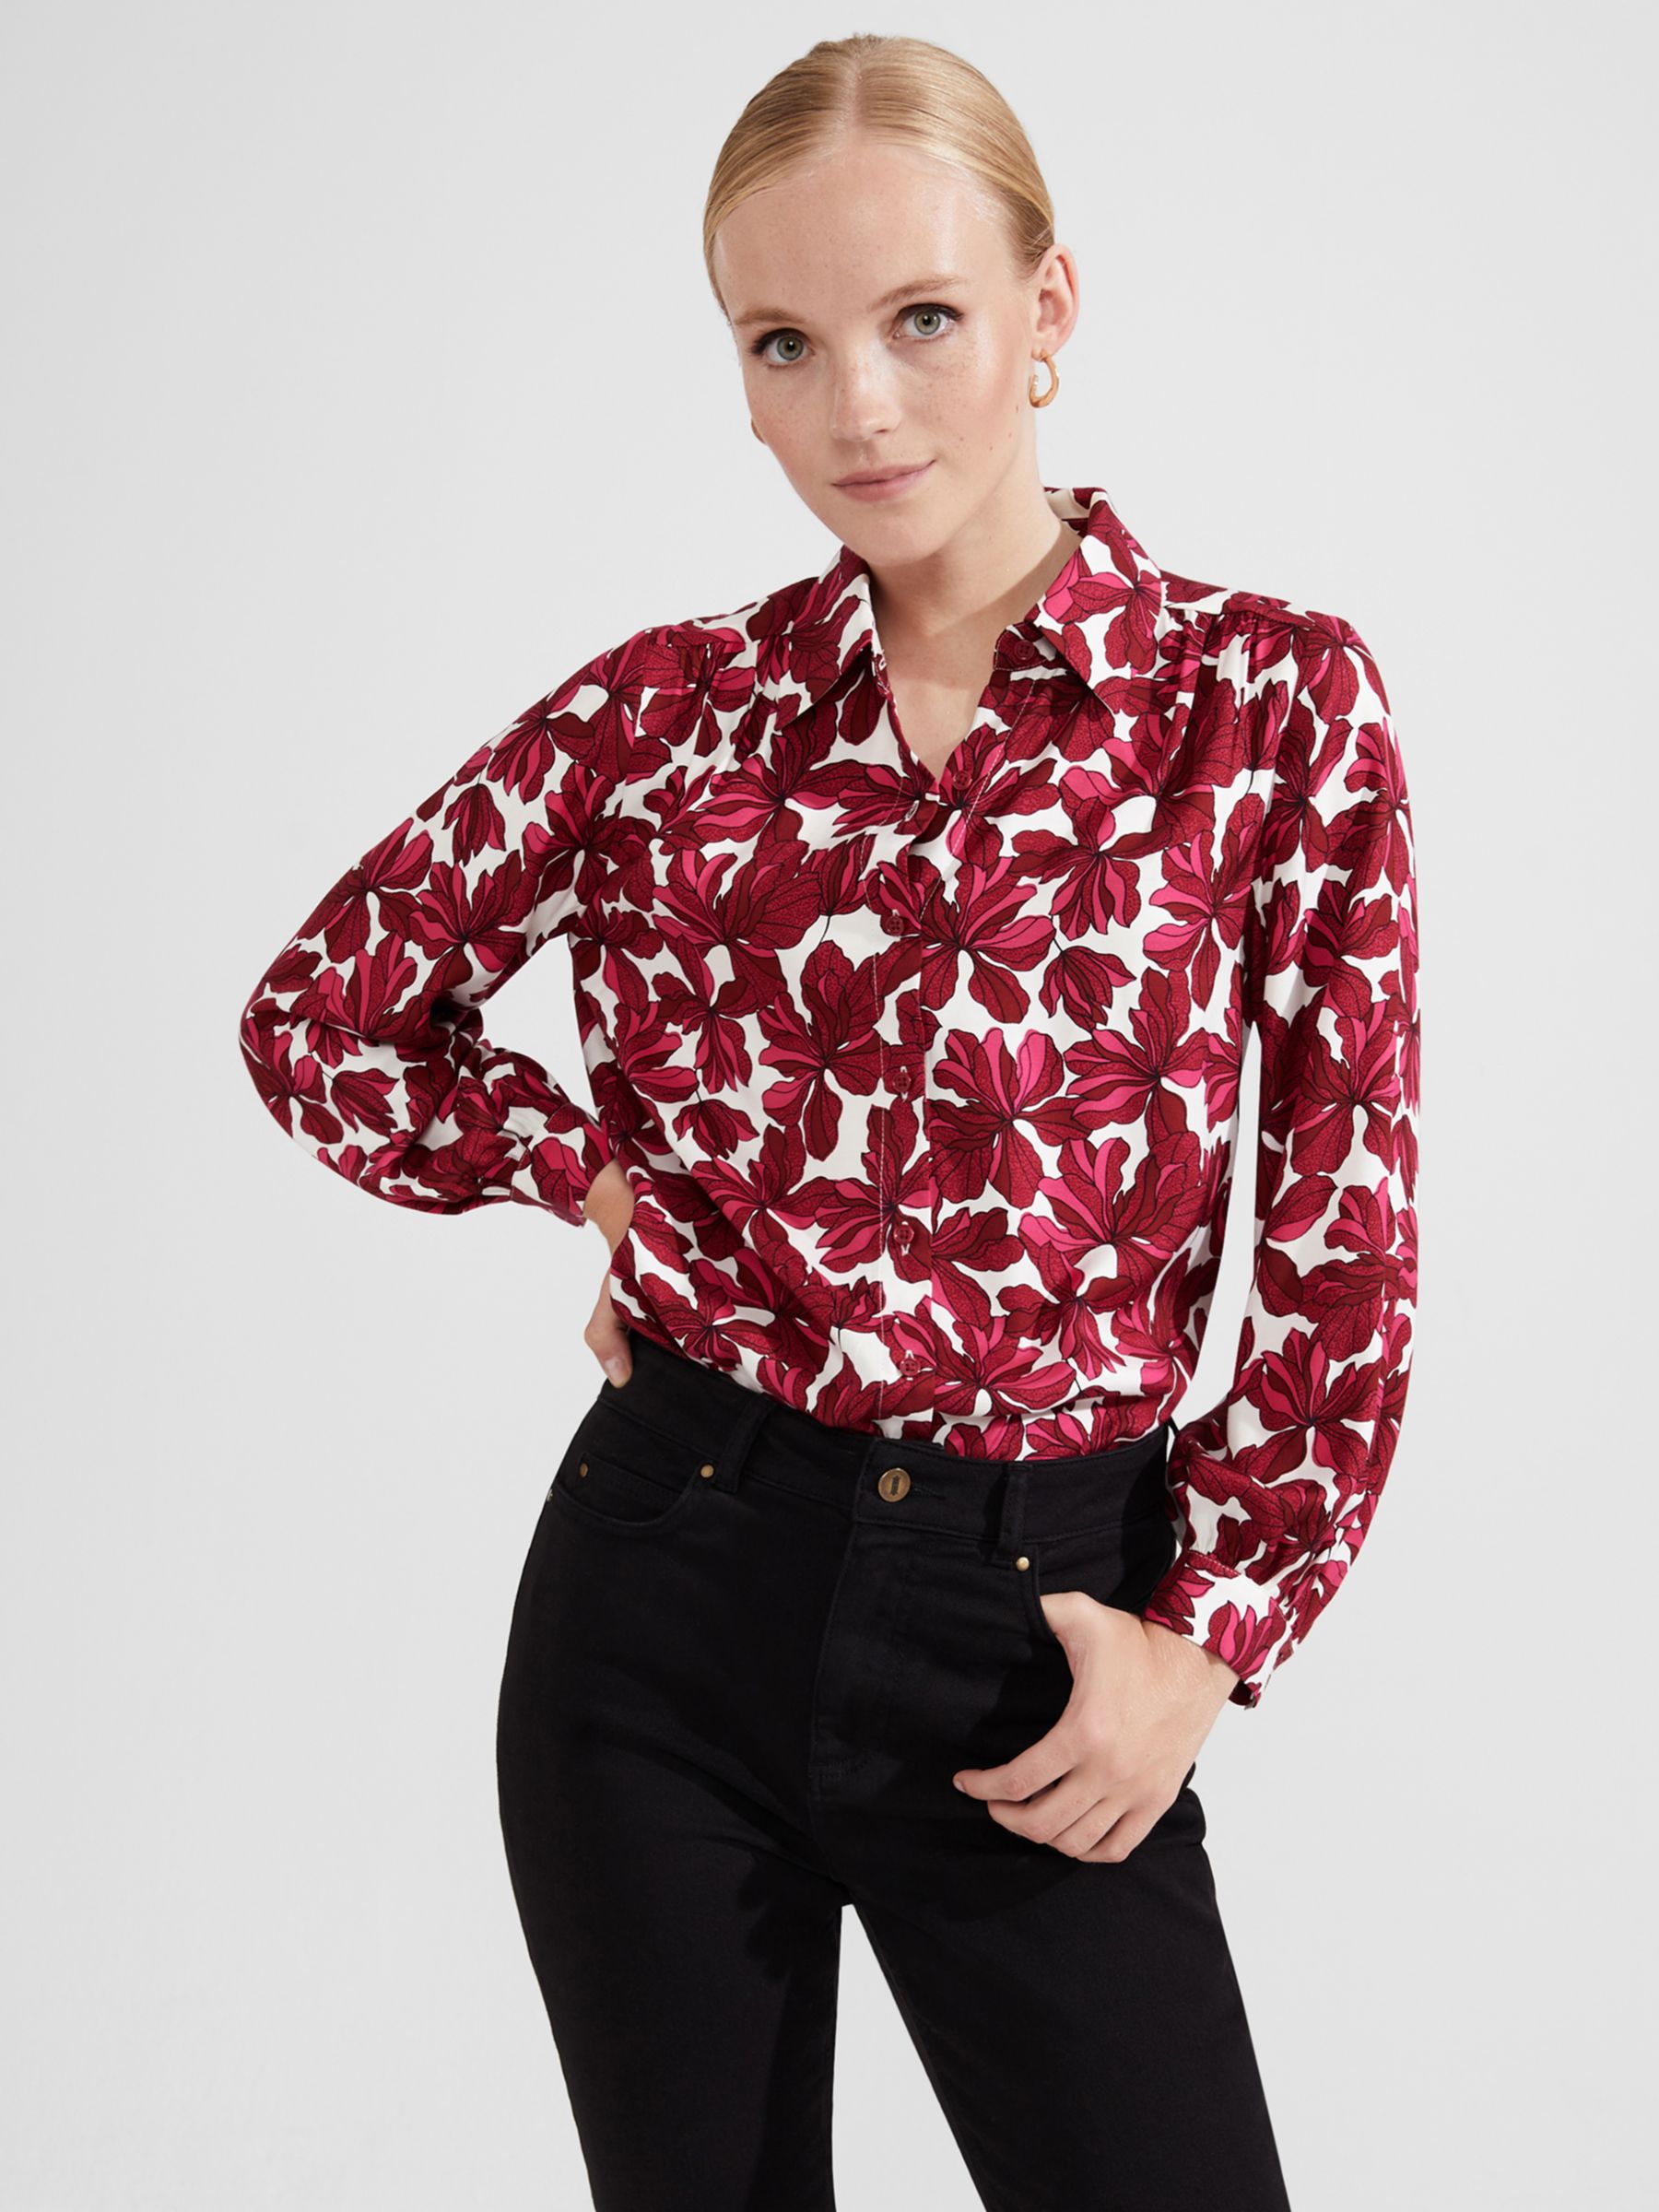 Hobbs Livia Ecovero Floral Blouse, Pink/Ivory at John Lewis & Partners